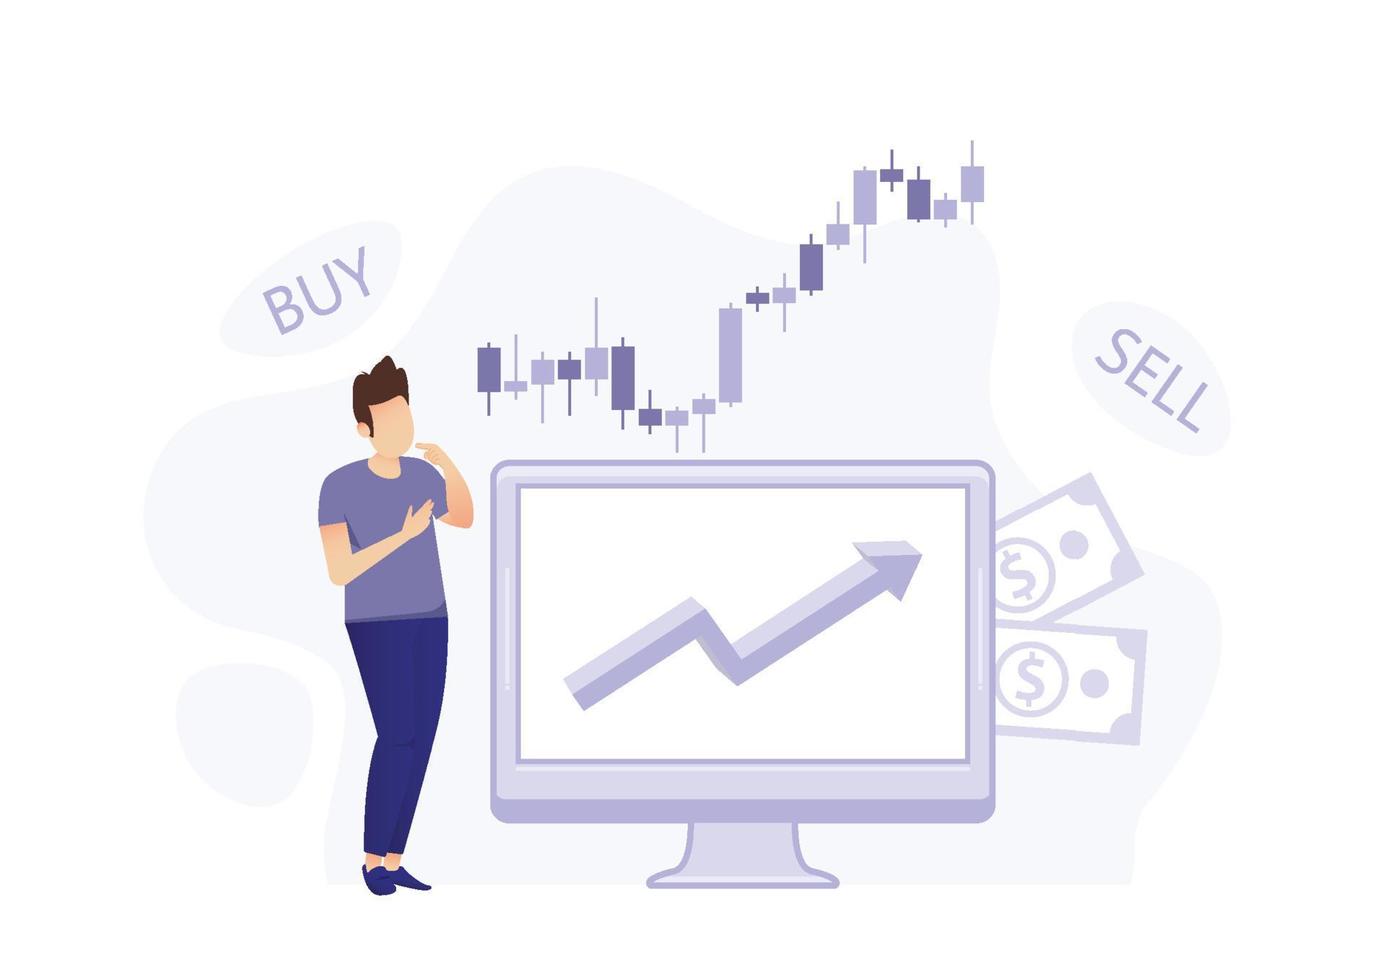 Stock market modern flat concept for web banner design. Male trader buys and sells on stock exchange, analyzes charts and statistics, invests money. Illustration with isolated people scene vector